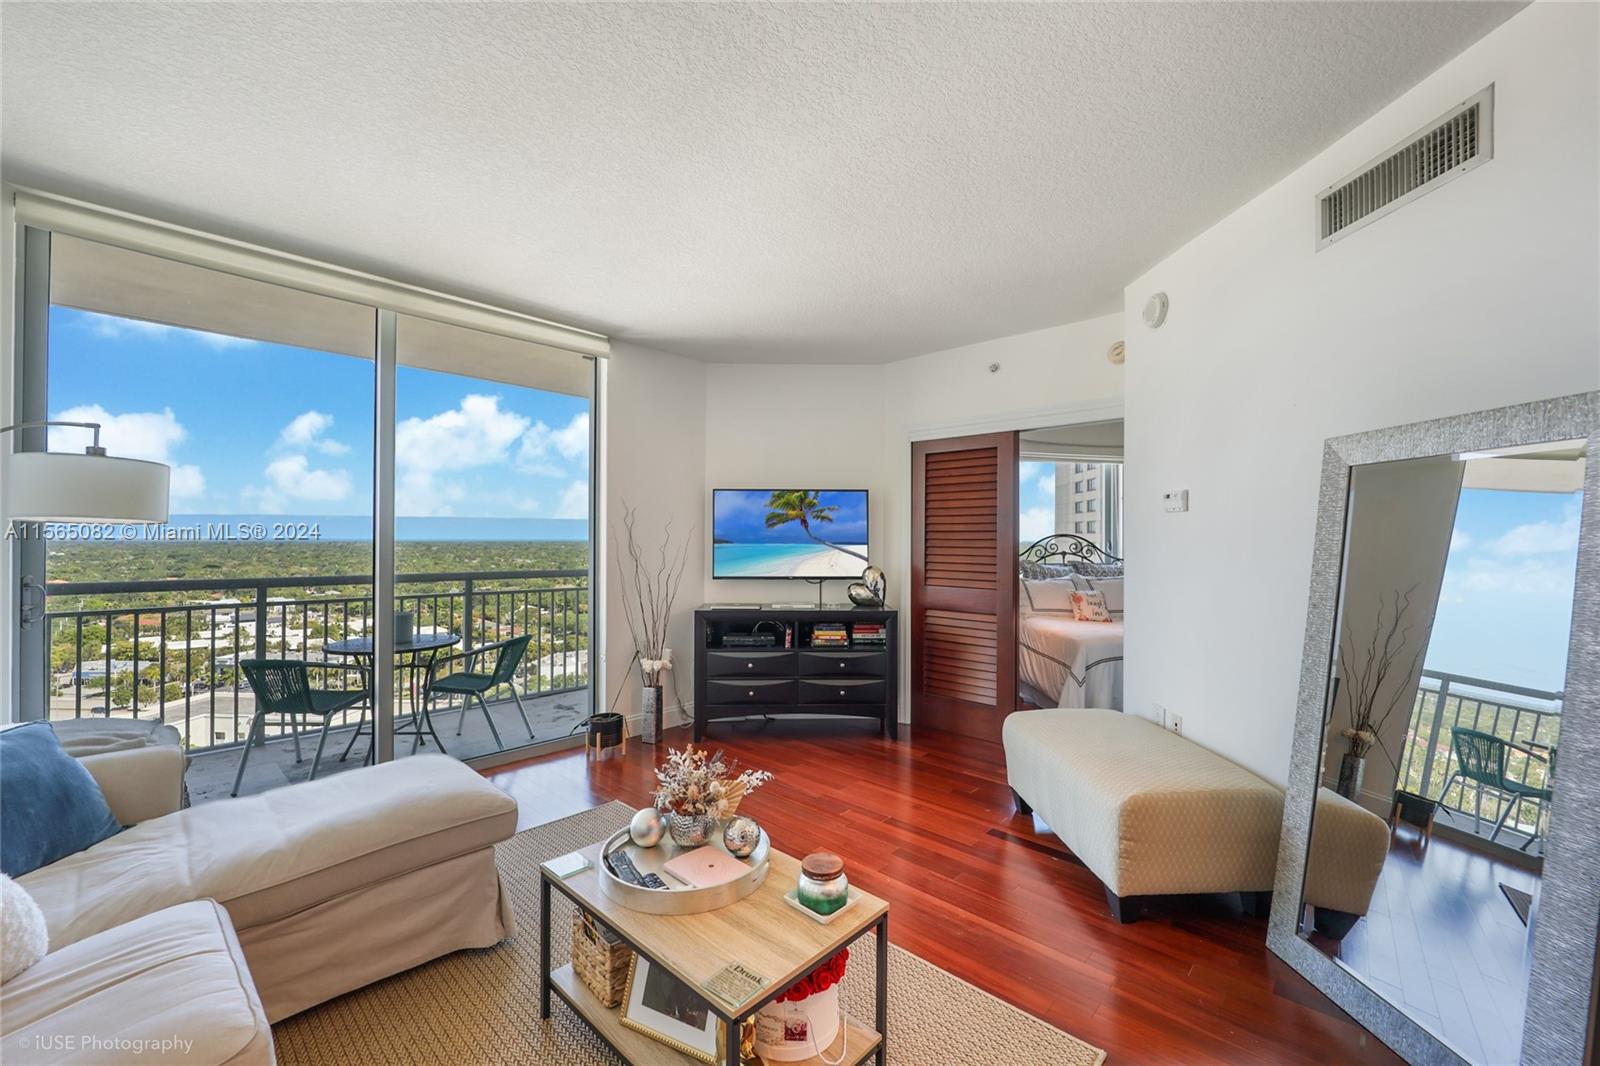 9055 SW 73rd Ct 1703, Miami, Florida 33156, 1 Bedroom Bedrooms, ,1 BathroomBathrooms,Residential,For Sale,9055 SW 73rd Ct 1703,A11565082